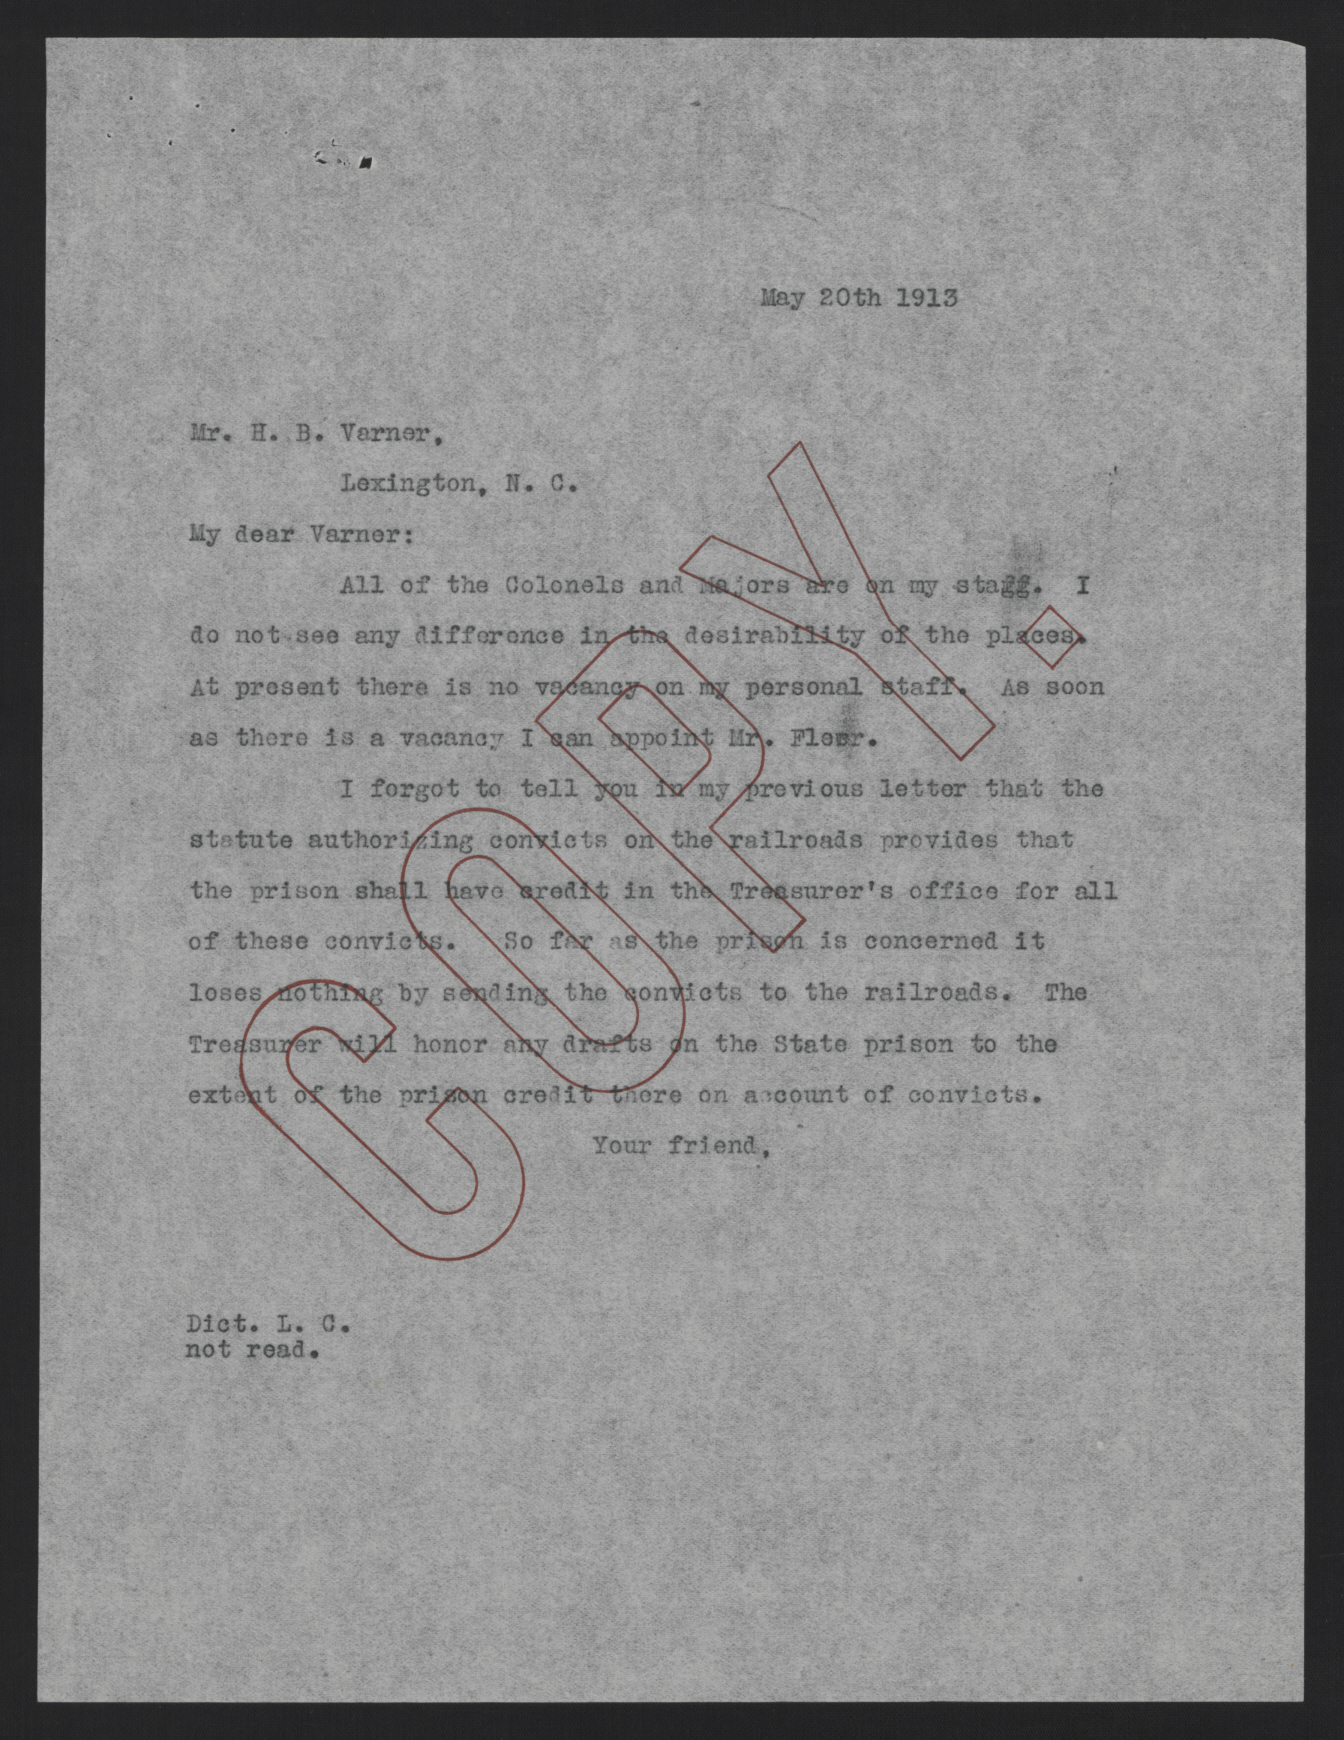 Letter from Craig to Varner, May 20, 1913